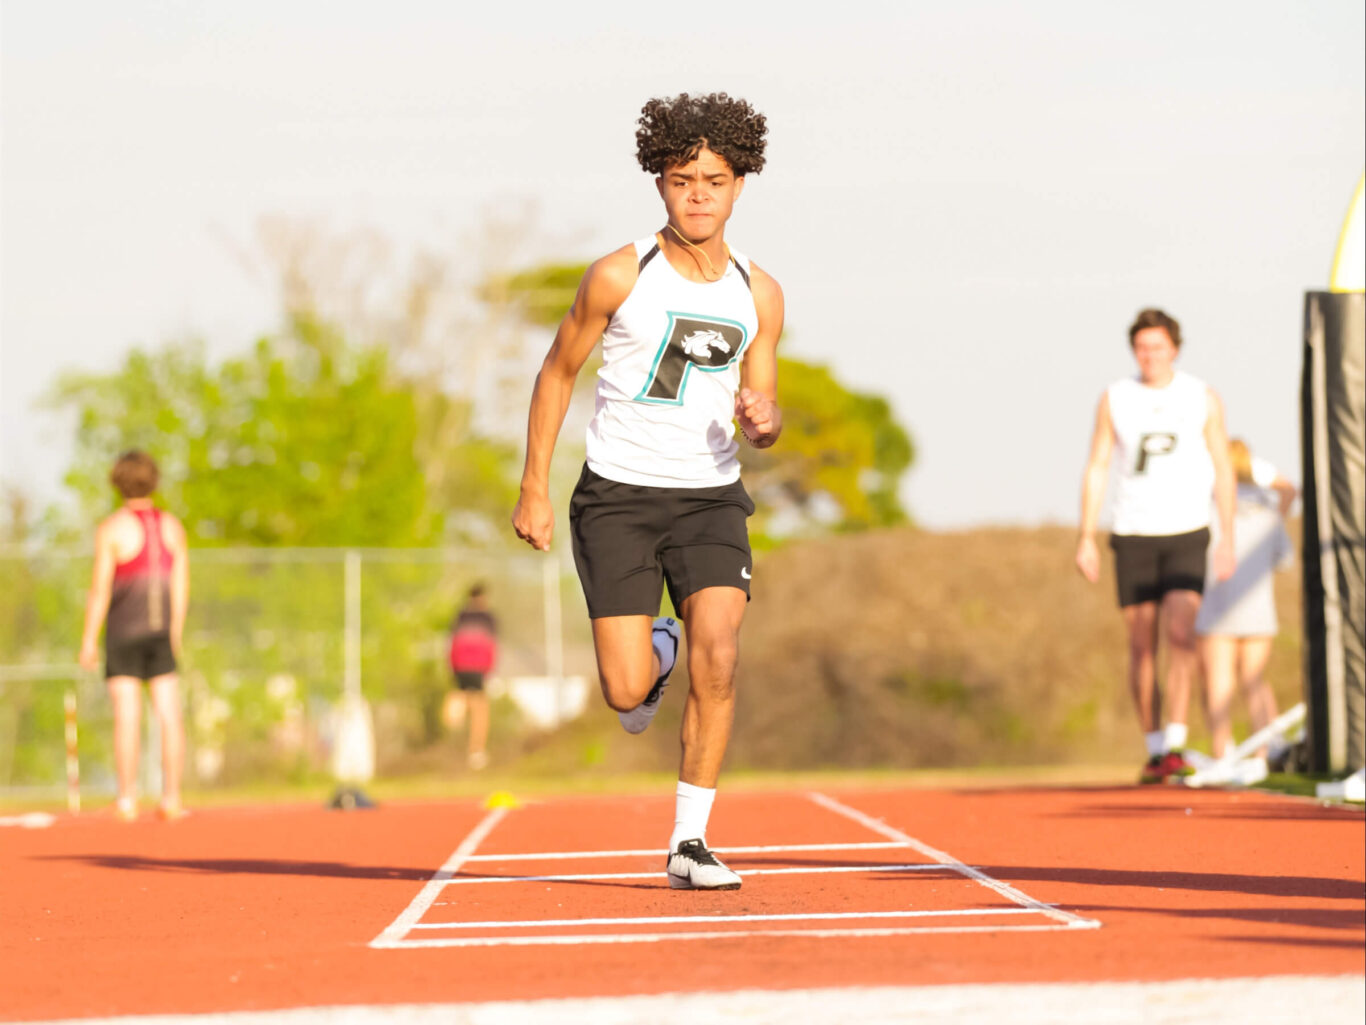 A young man running on a track in a field.